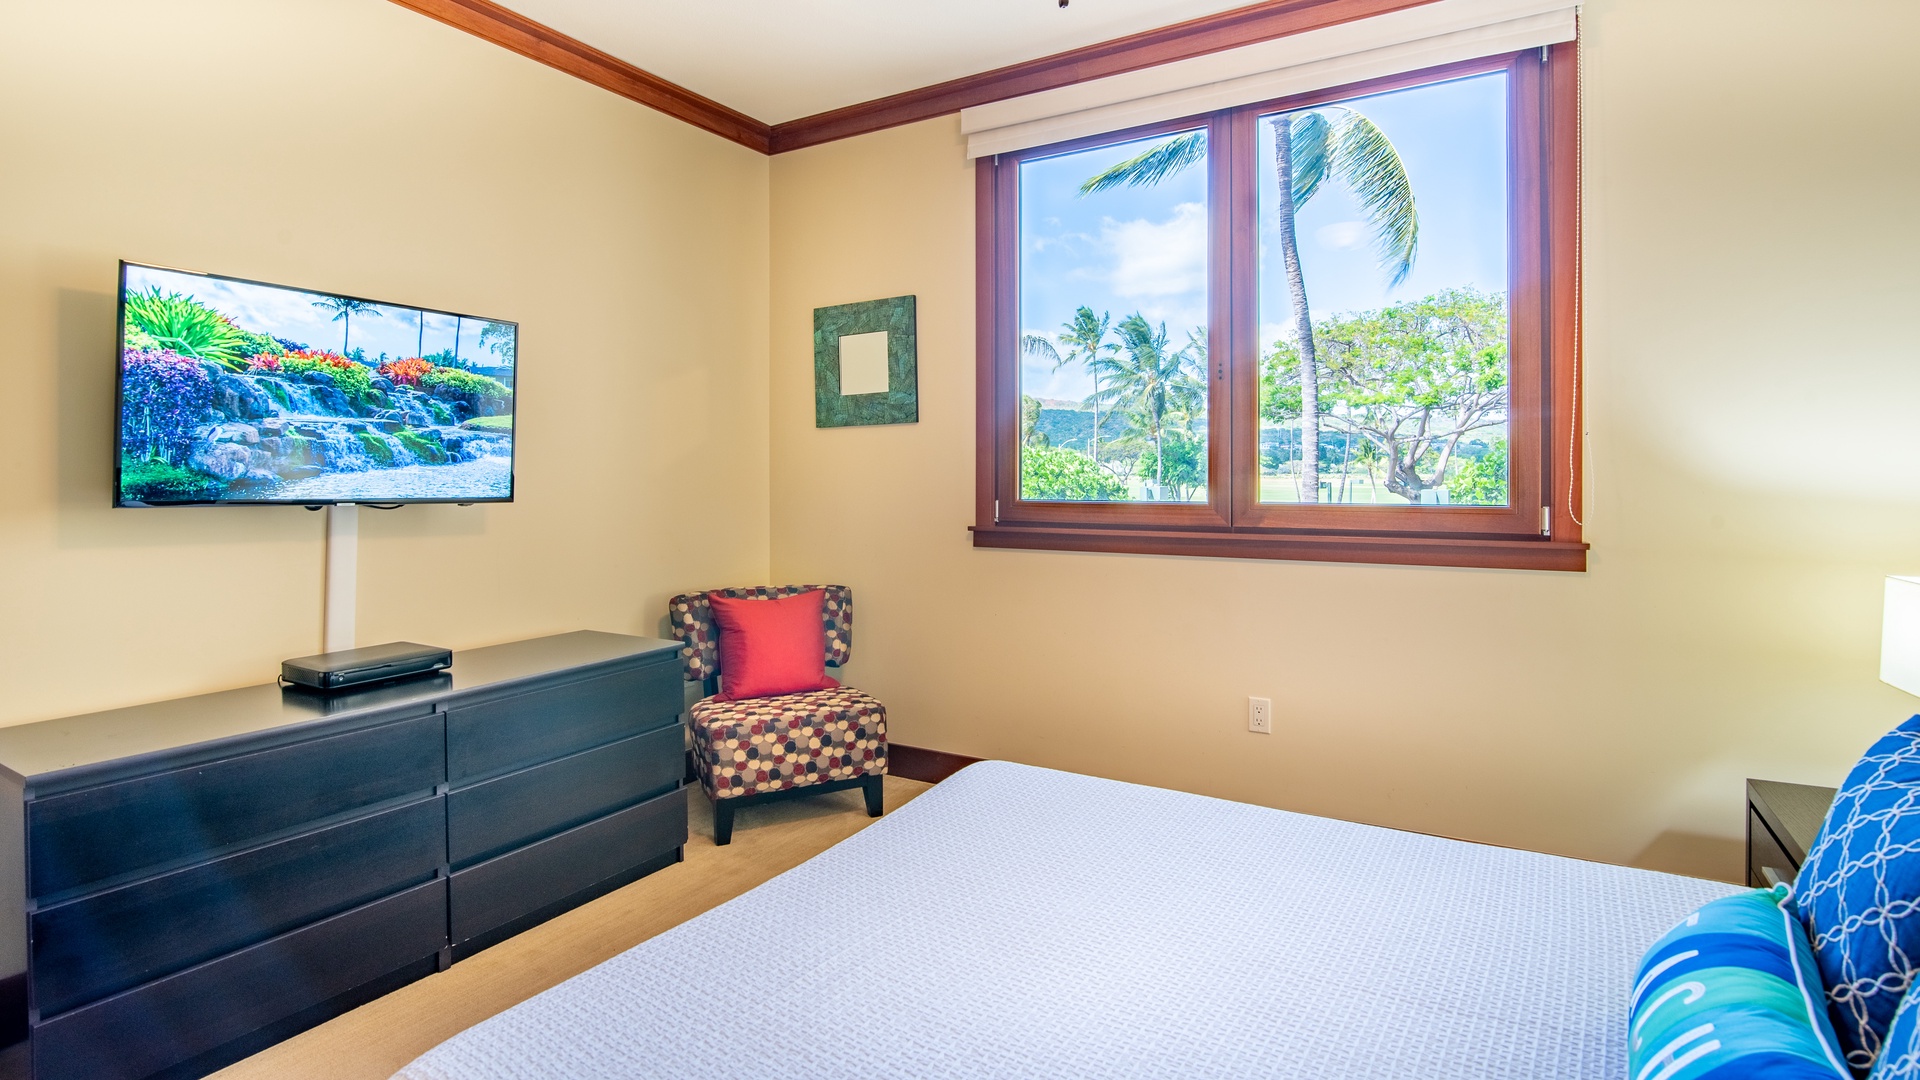 Kapolei Vacation Rentals, Ko Olina Beach Villas O210 - The second guest bedroom with a TV and ceiling fan and views.